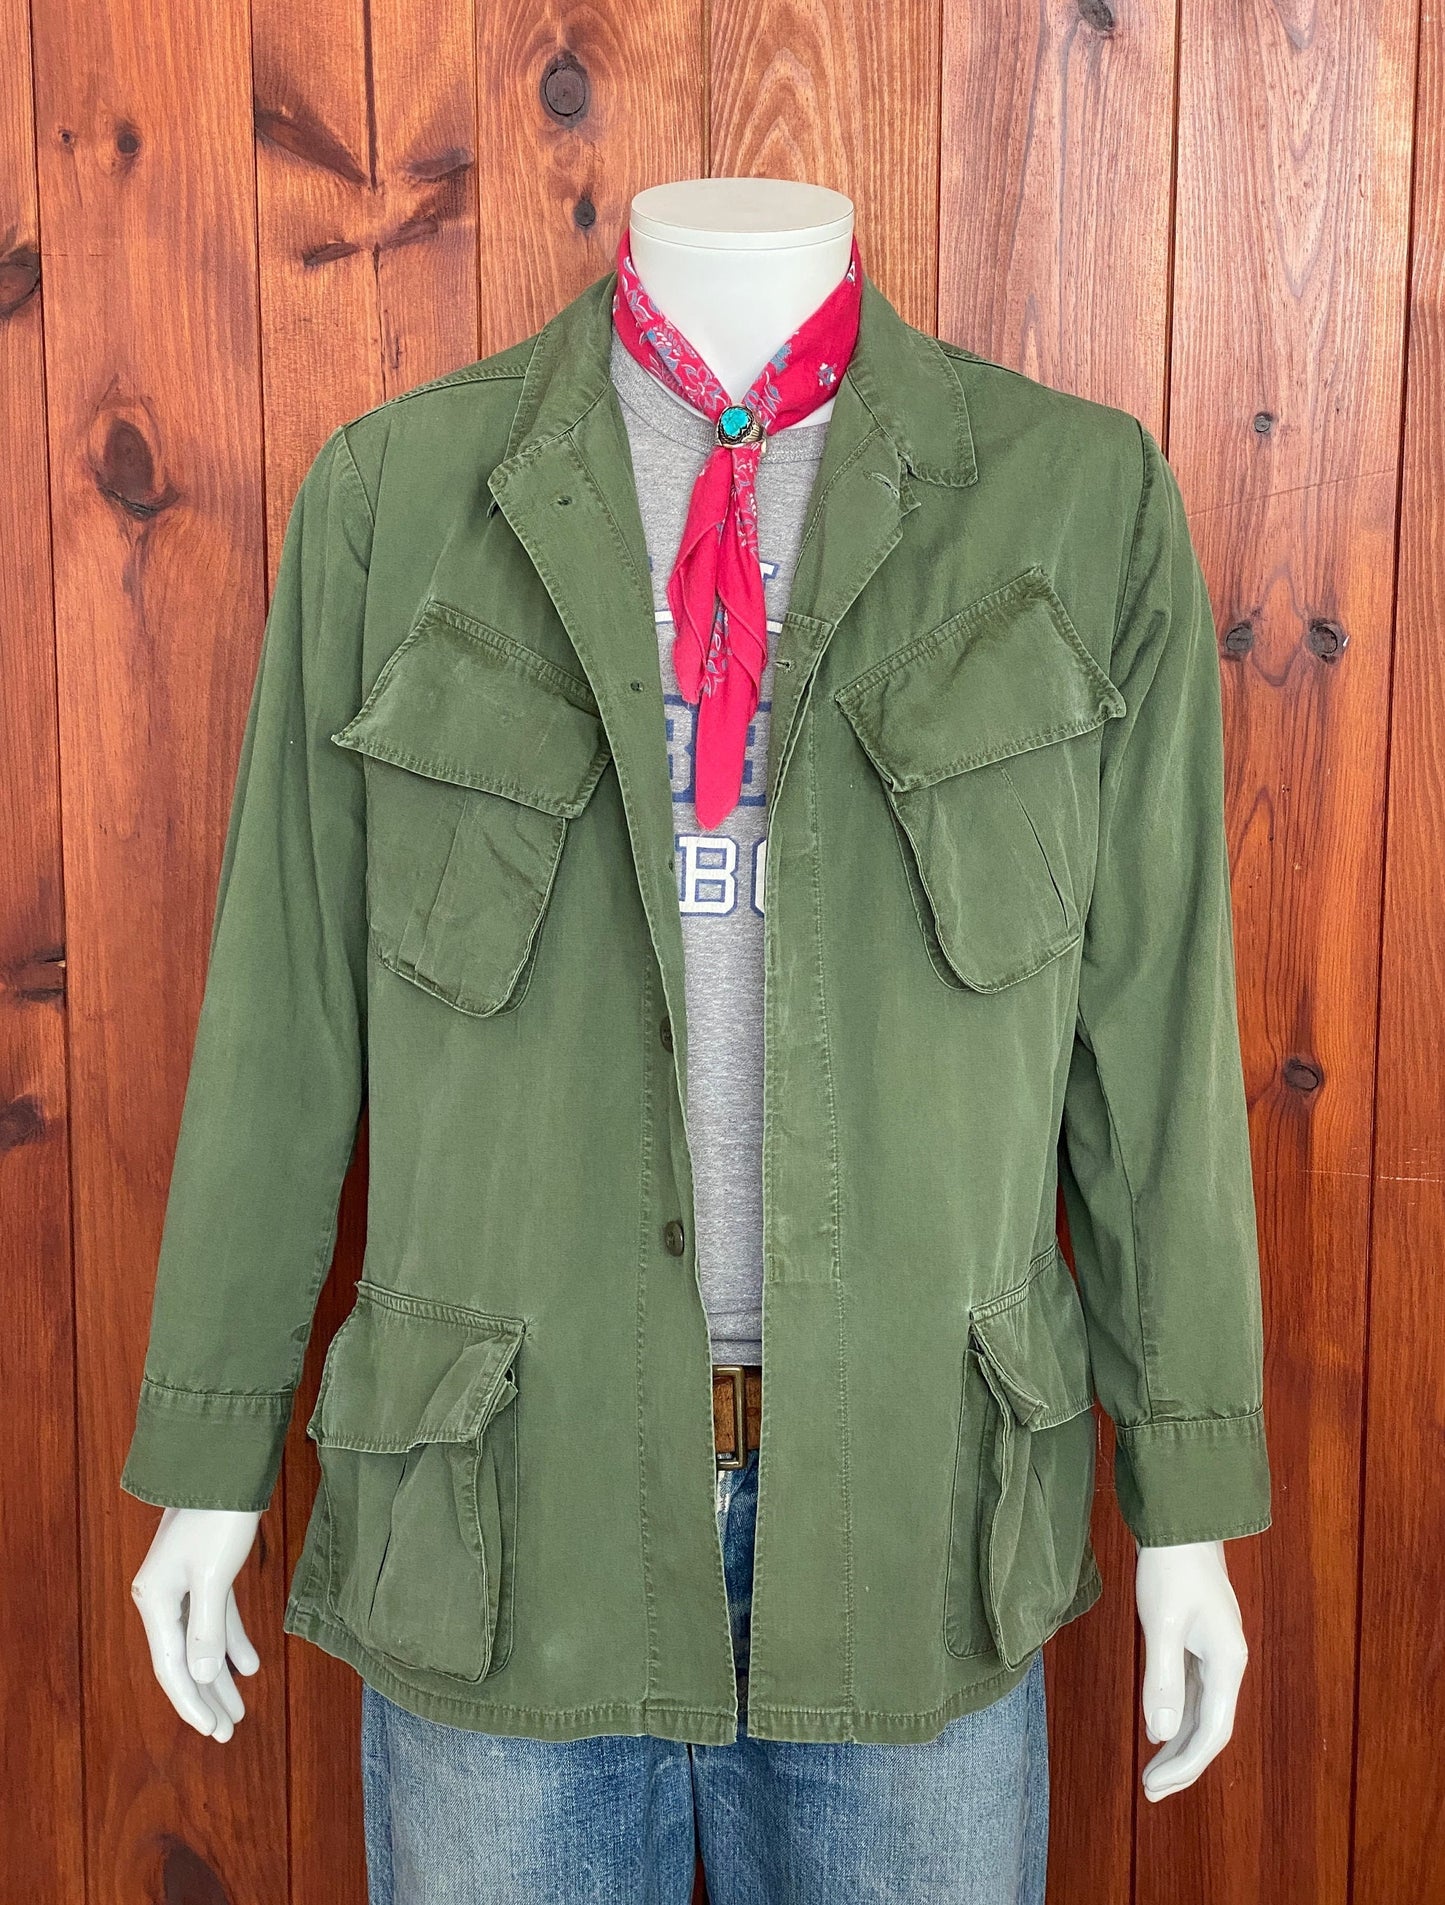 Med Reg. Authentic 1967 3th pattern US Army Vintage tropical Vietnam  jungle jacket.